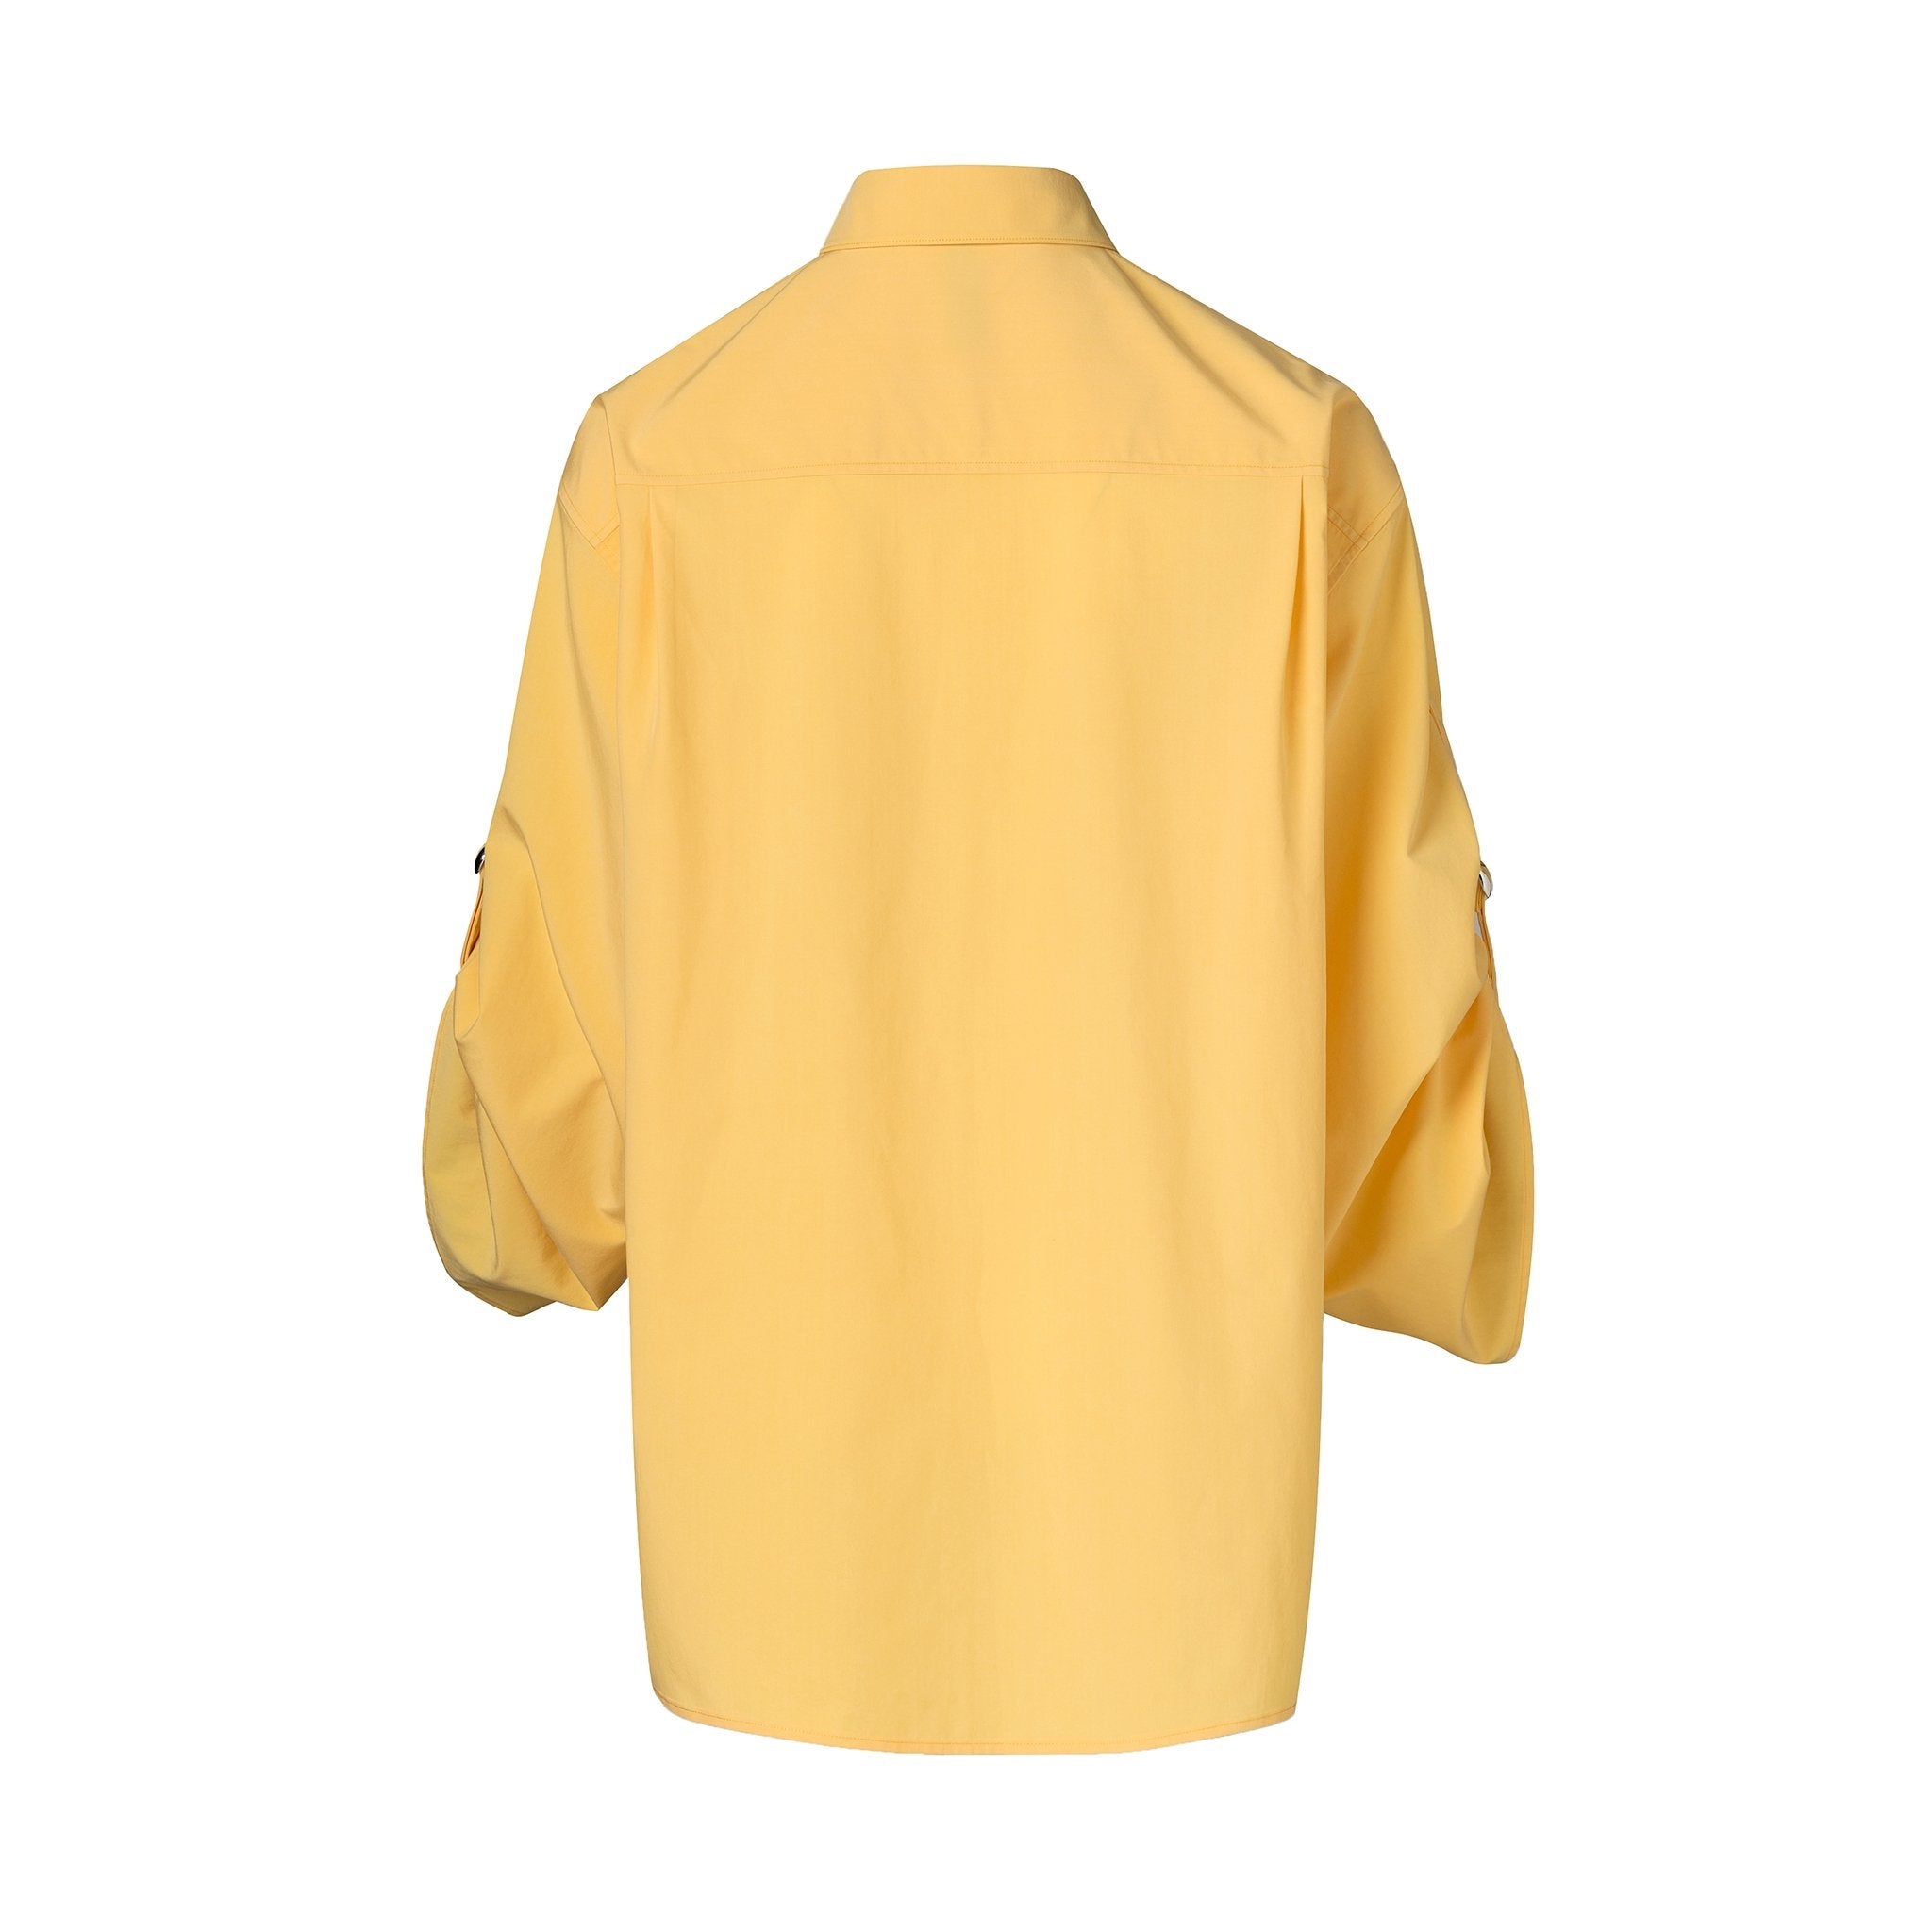 Ther. Long-Sleeved Shirt | MADA IN CHINA